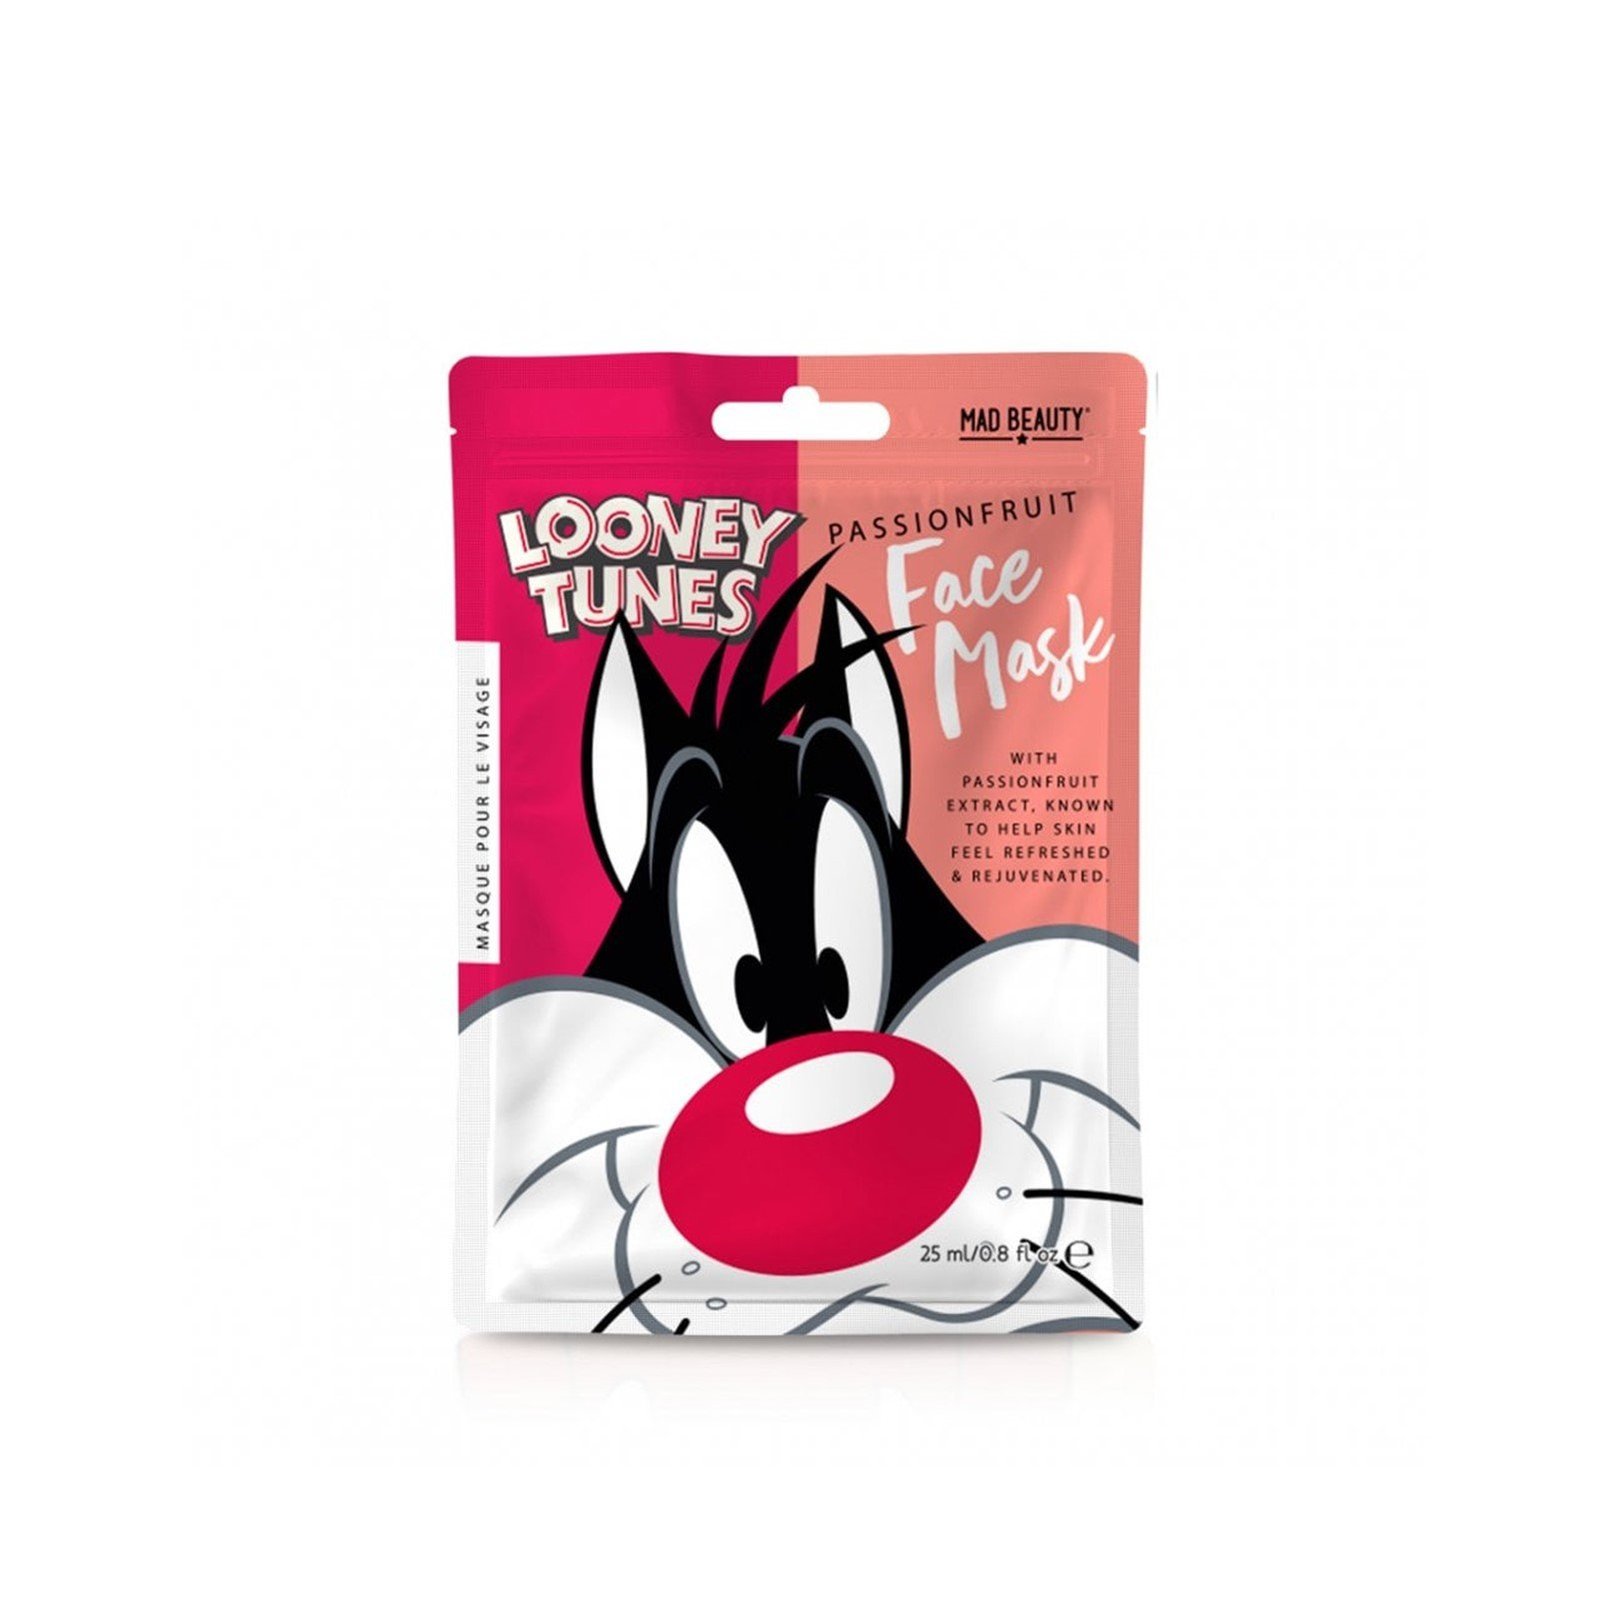 Mad Beauty Warner Brothers Looney Tunes Sylvester Sheet Face Mask 25ml (0.8 fl oz)